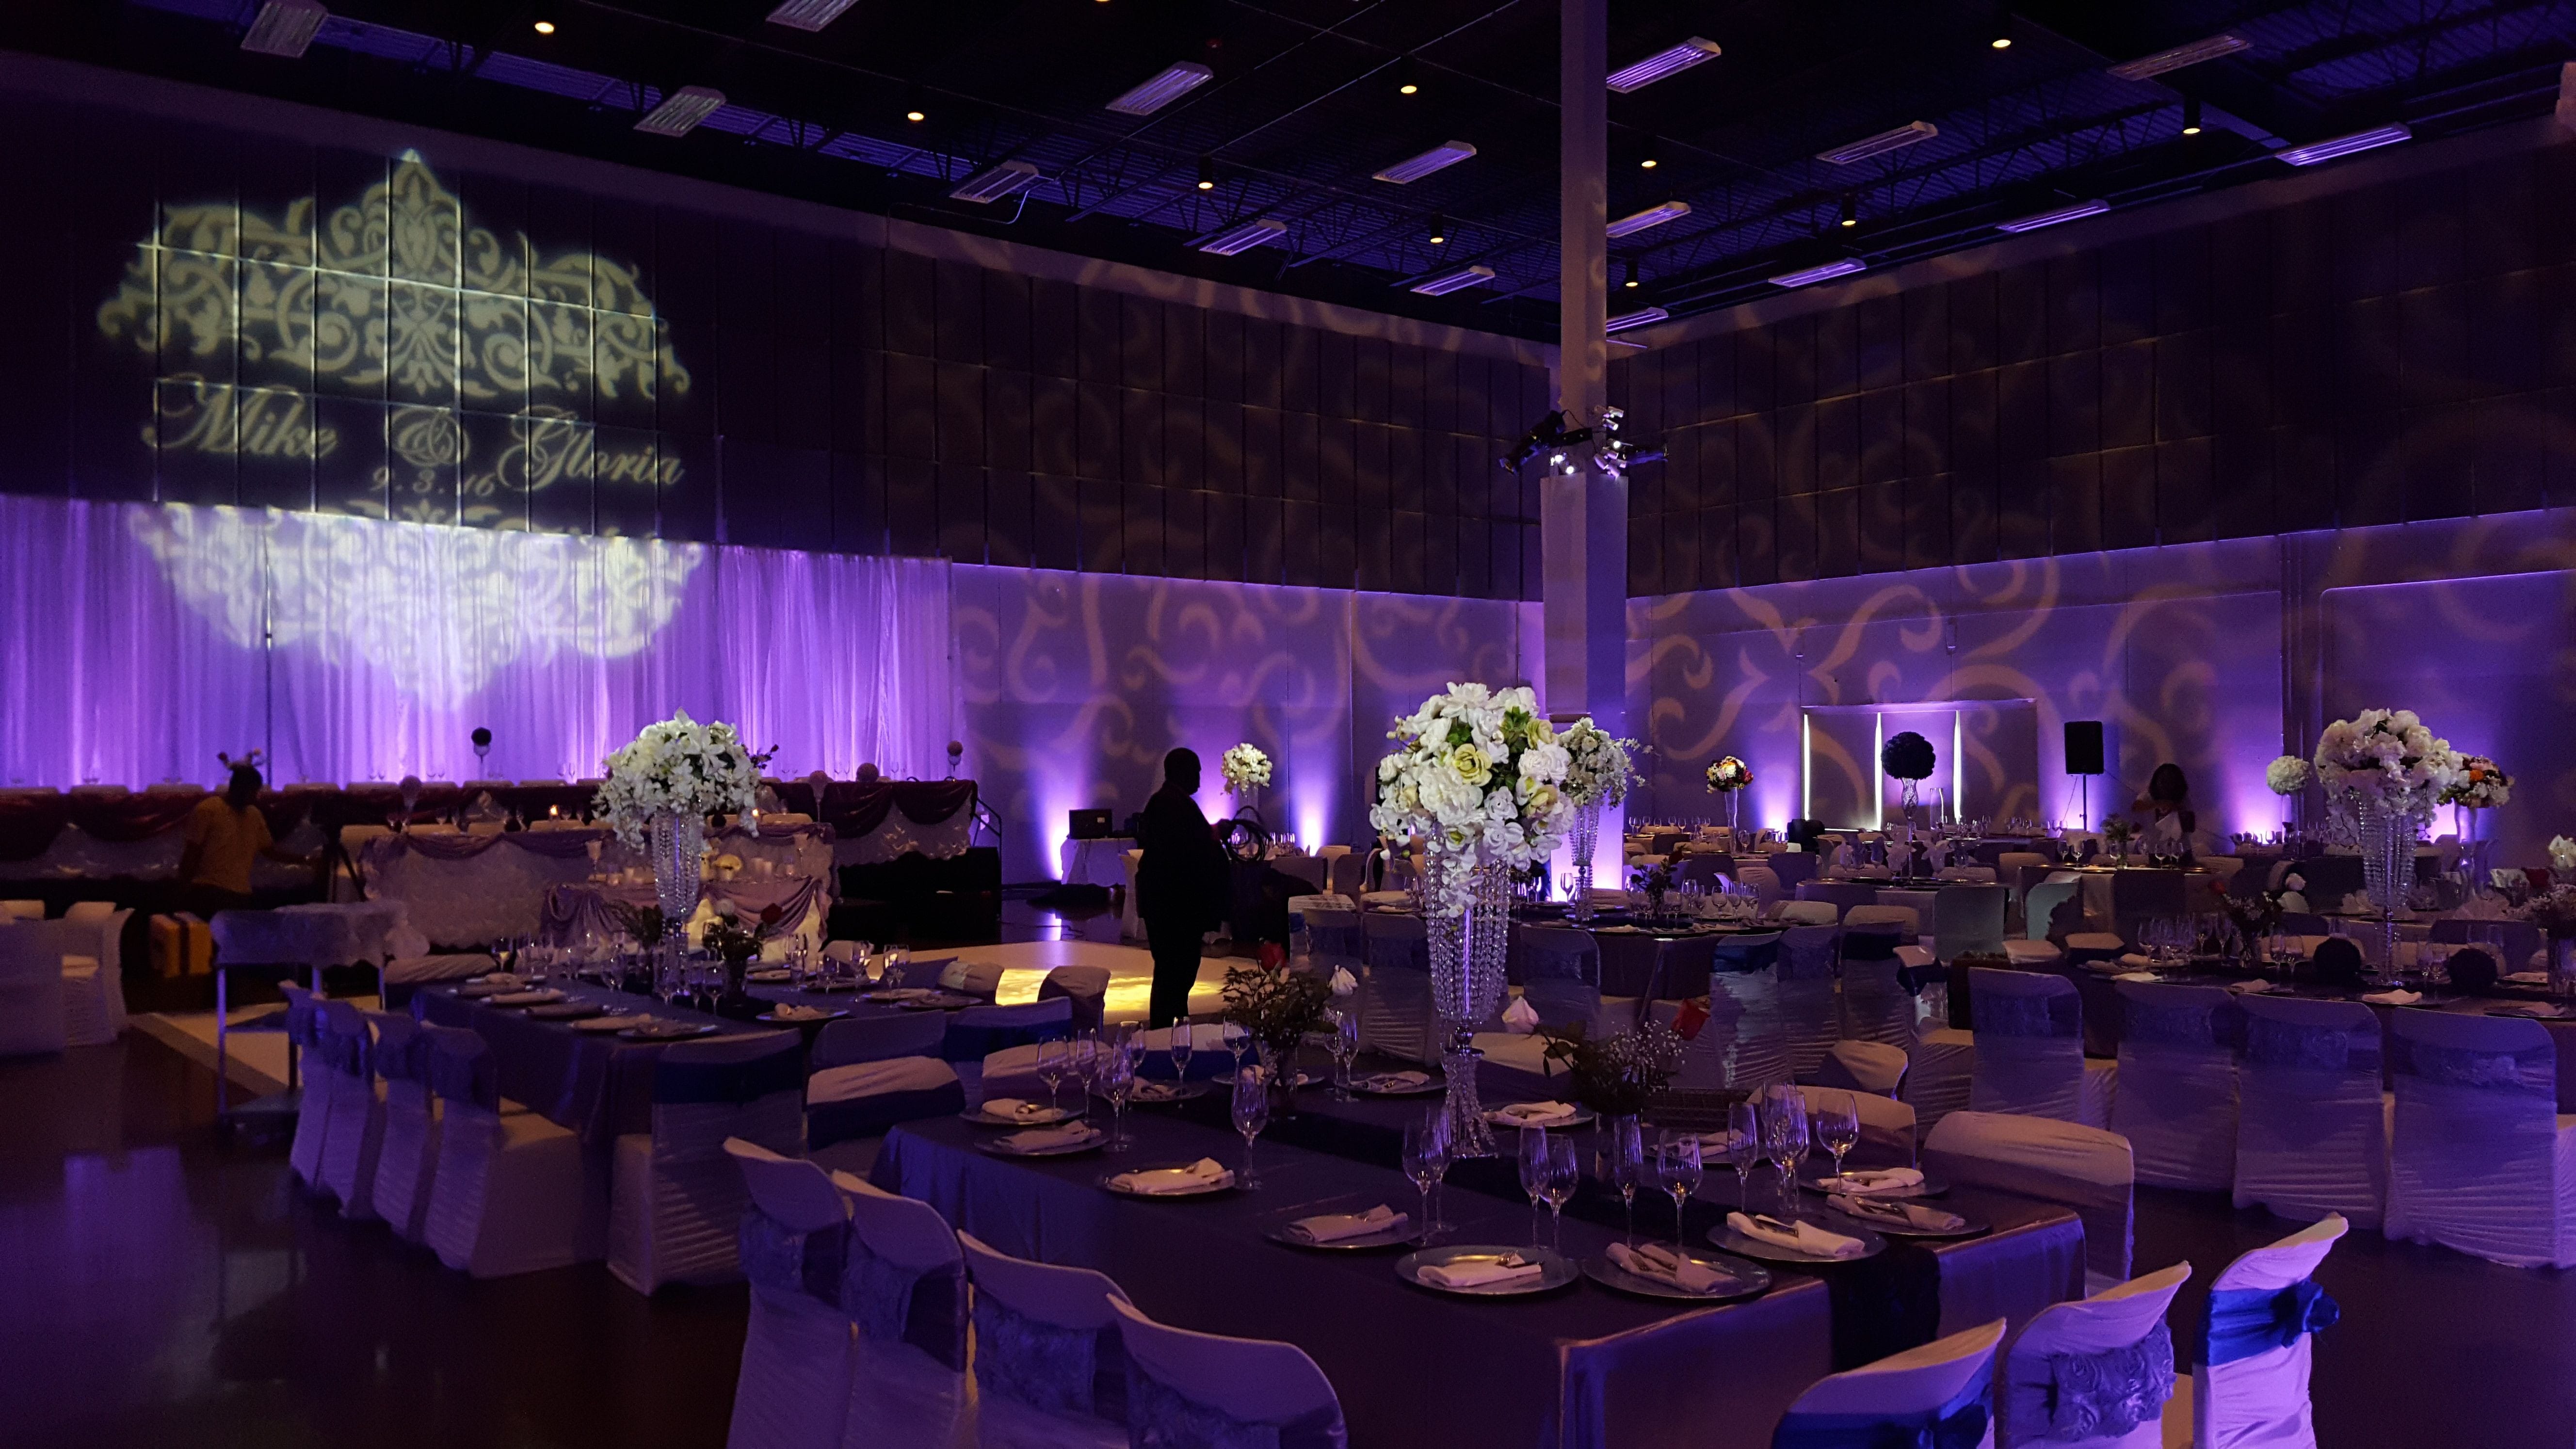 Wedding lighting at the Passion Event Center. Up lighting in lavender purple. Pin spots on flowers. Wedding monogram.